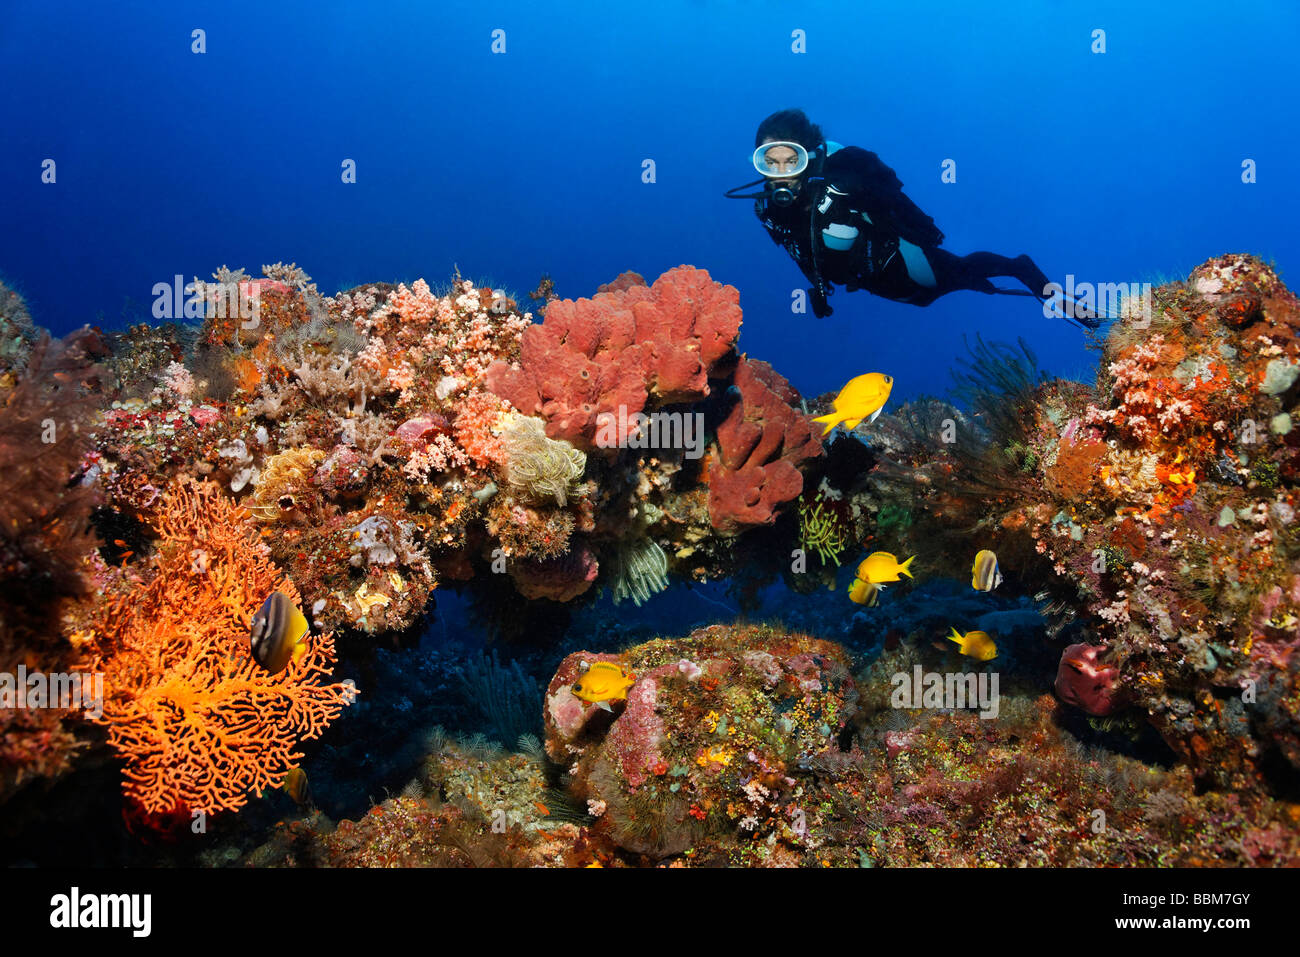 Scuba Diver watches intact coral reef with fishes, colorful corals and other invertebrates, Gangga Island, Bangka Islands, Nort Stock Photo